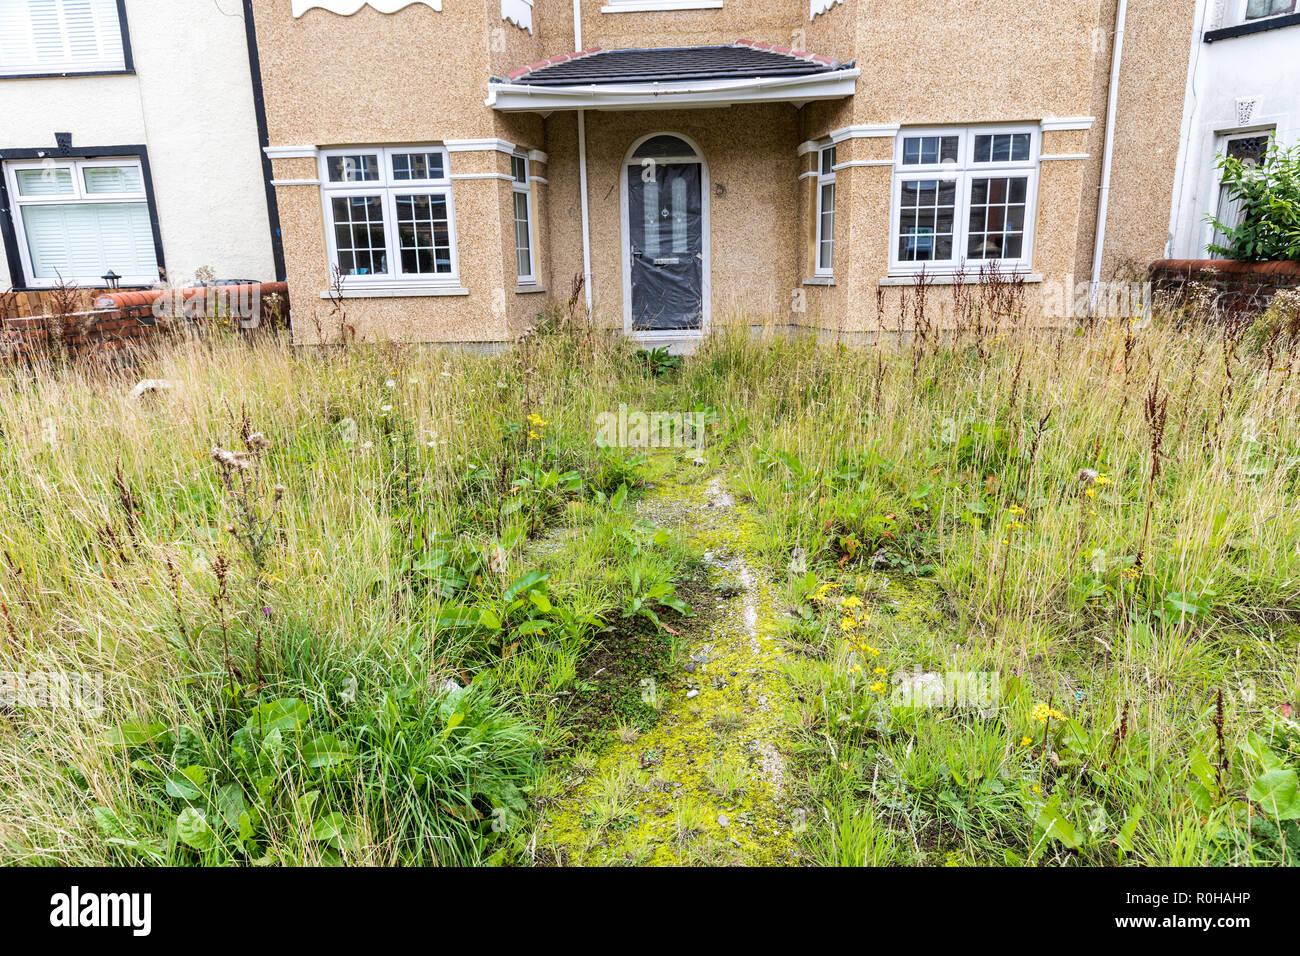 Renovated house with untidy garden, Brynmawr, Wales, UK Stock Photo